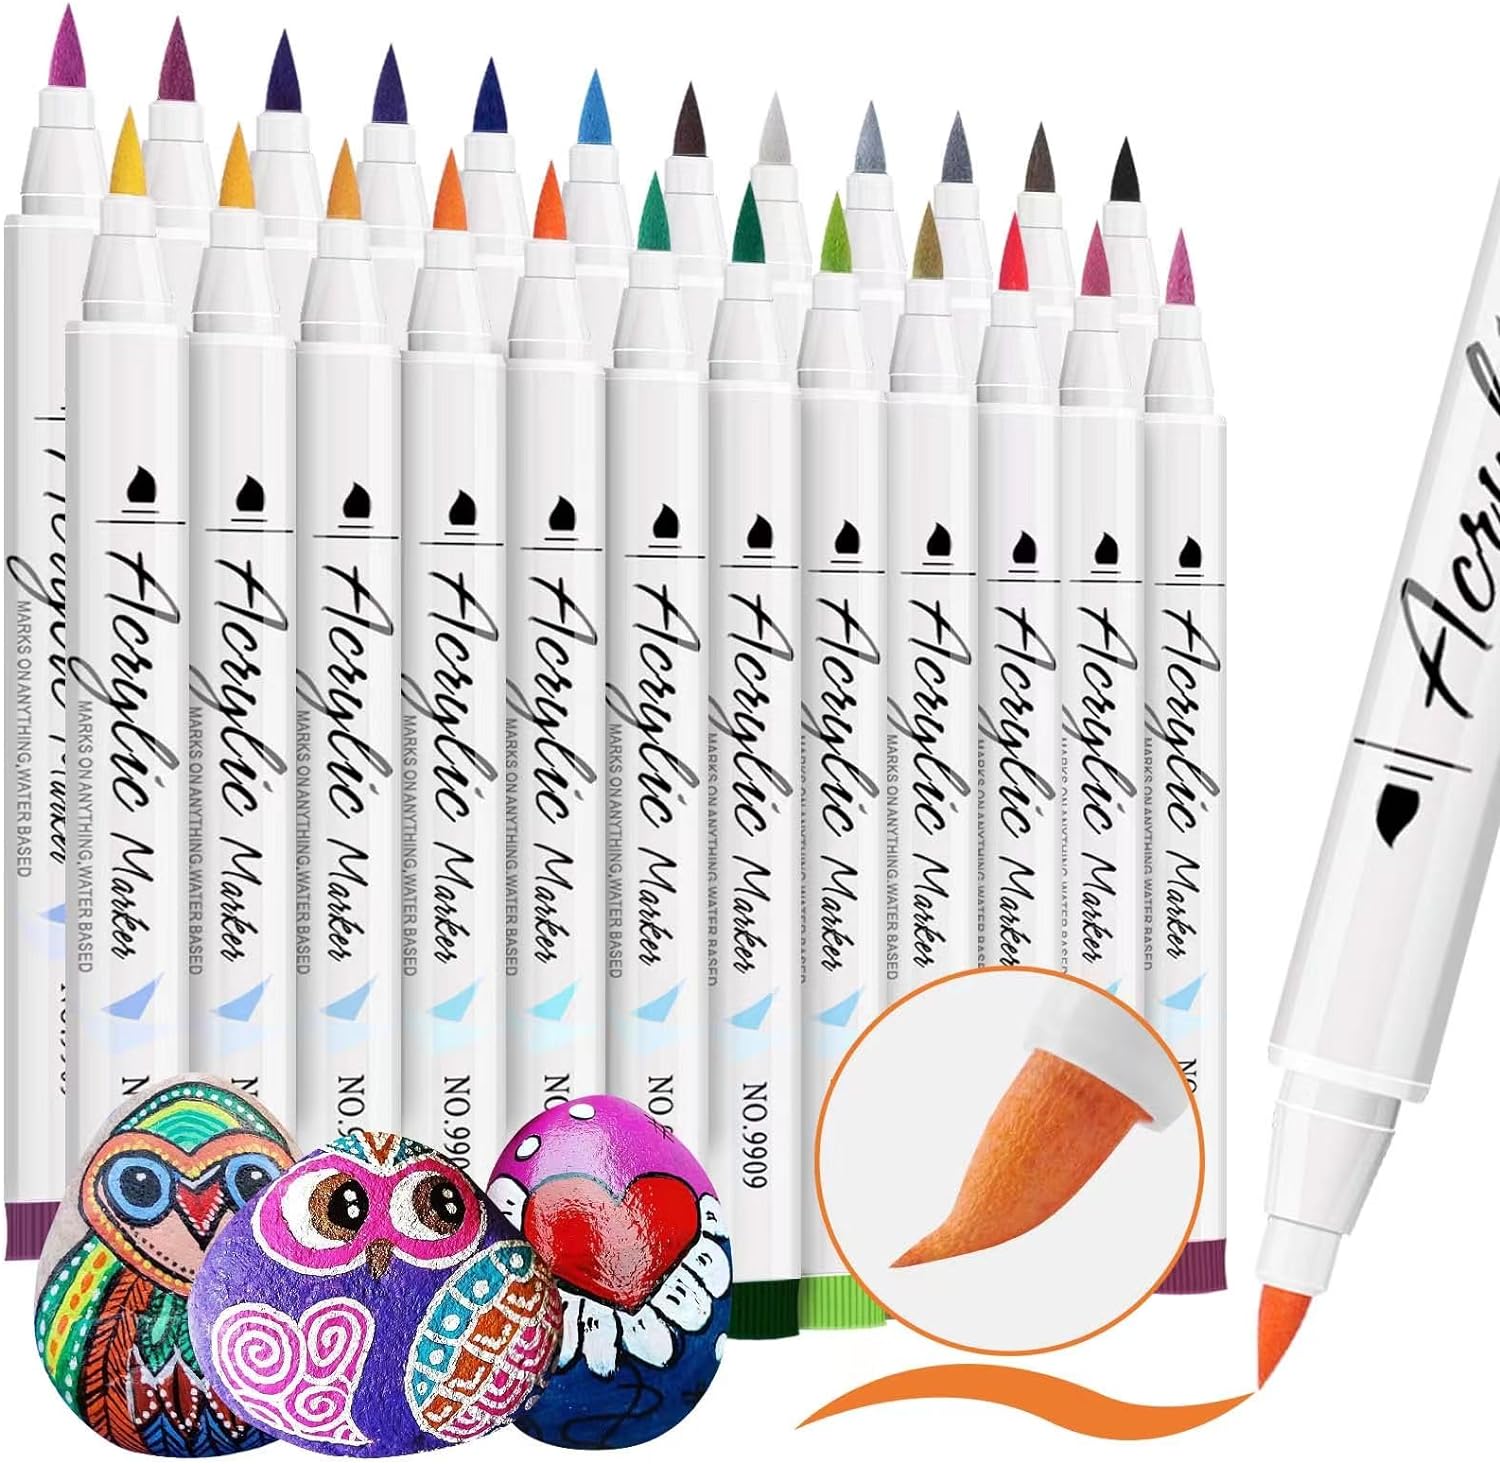 Lelix fabric markers, lelix 30 permanent colors dual tip fabric